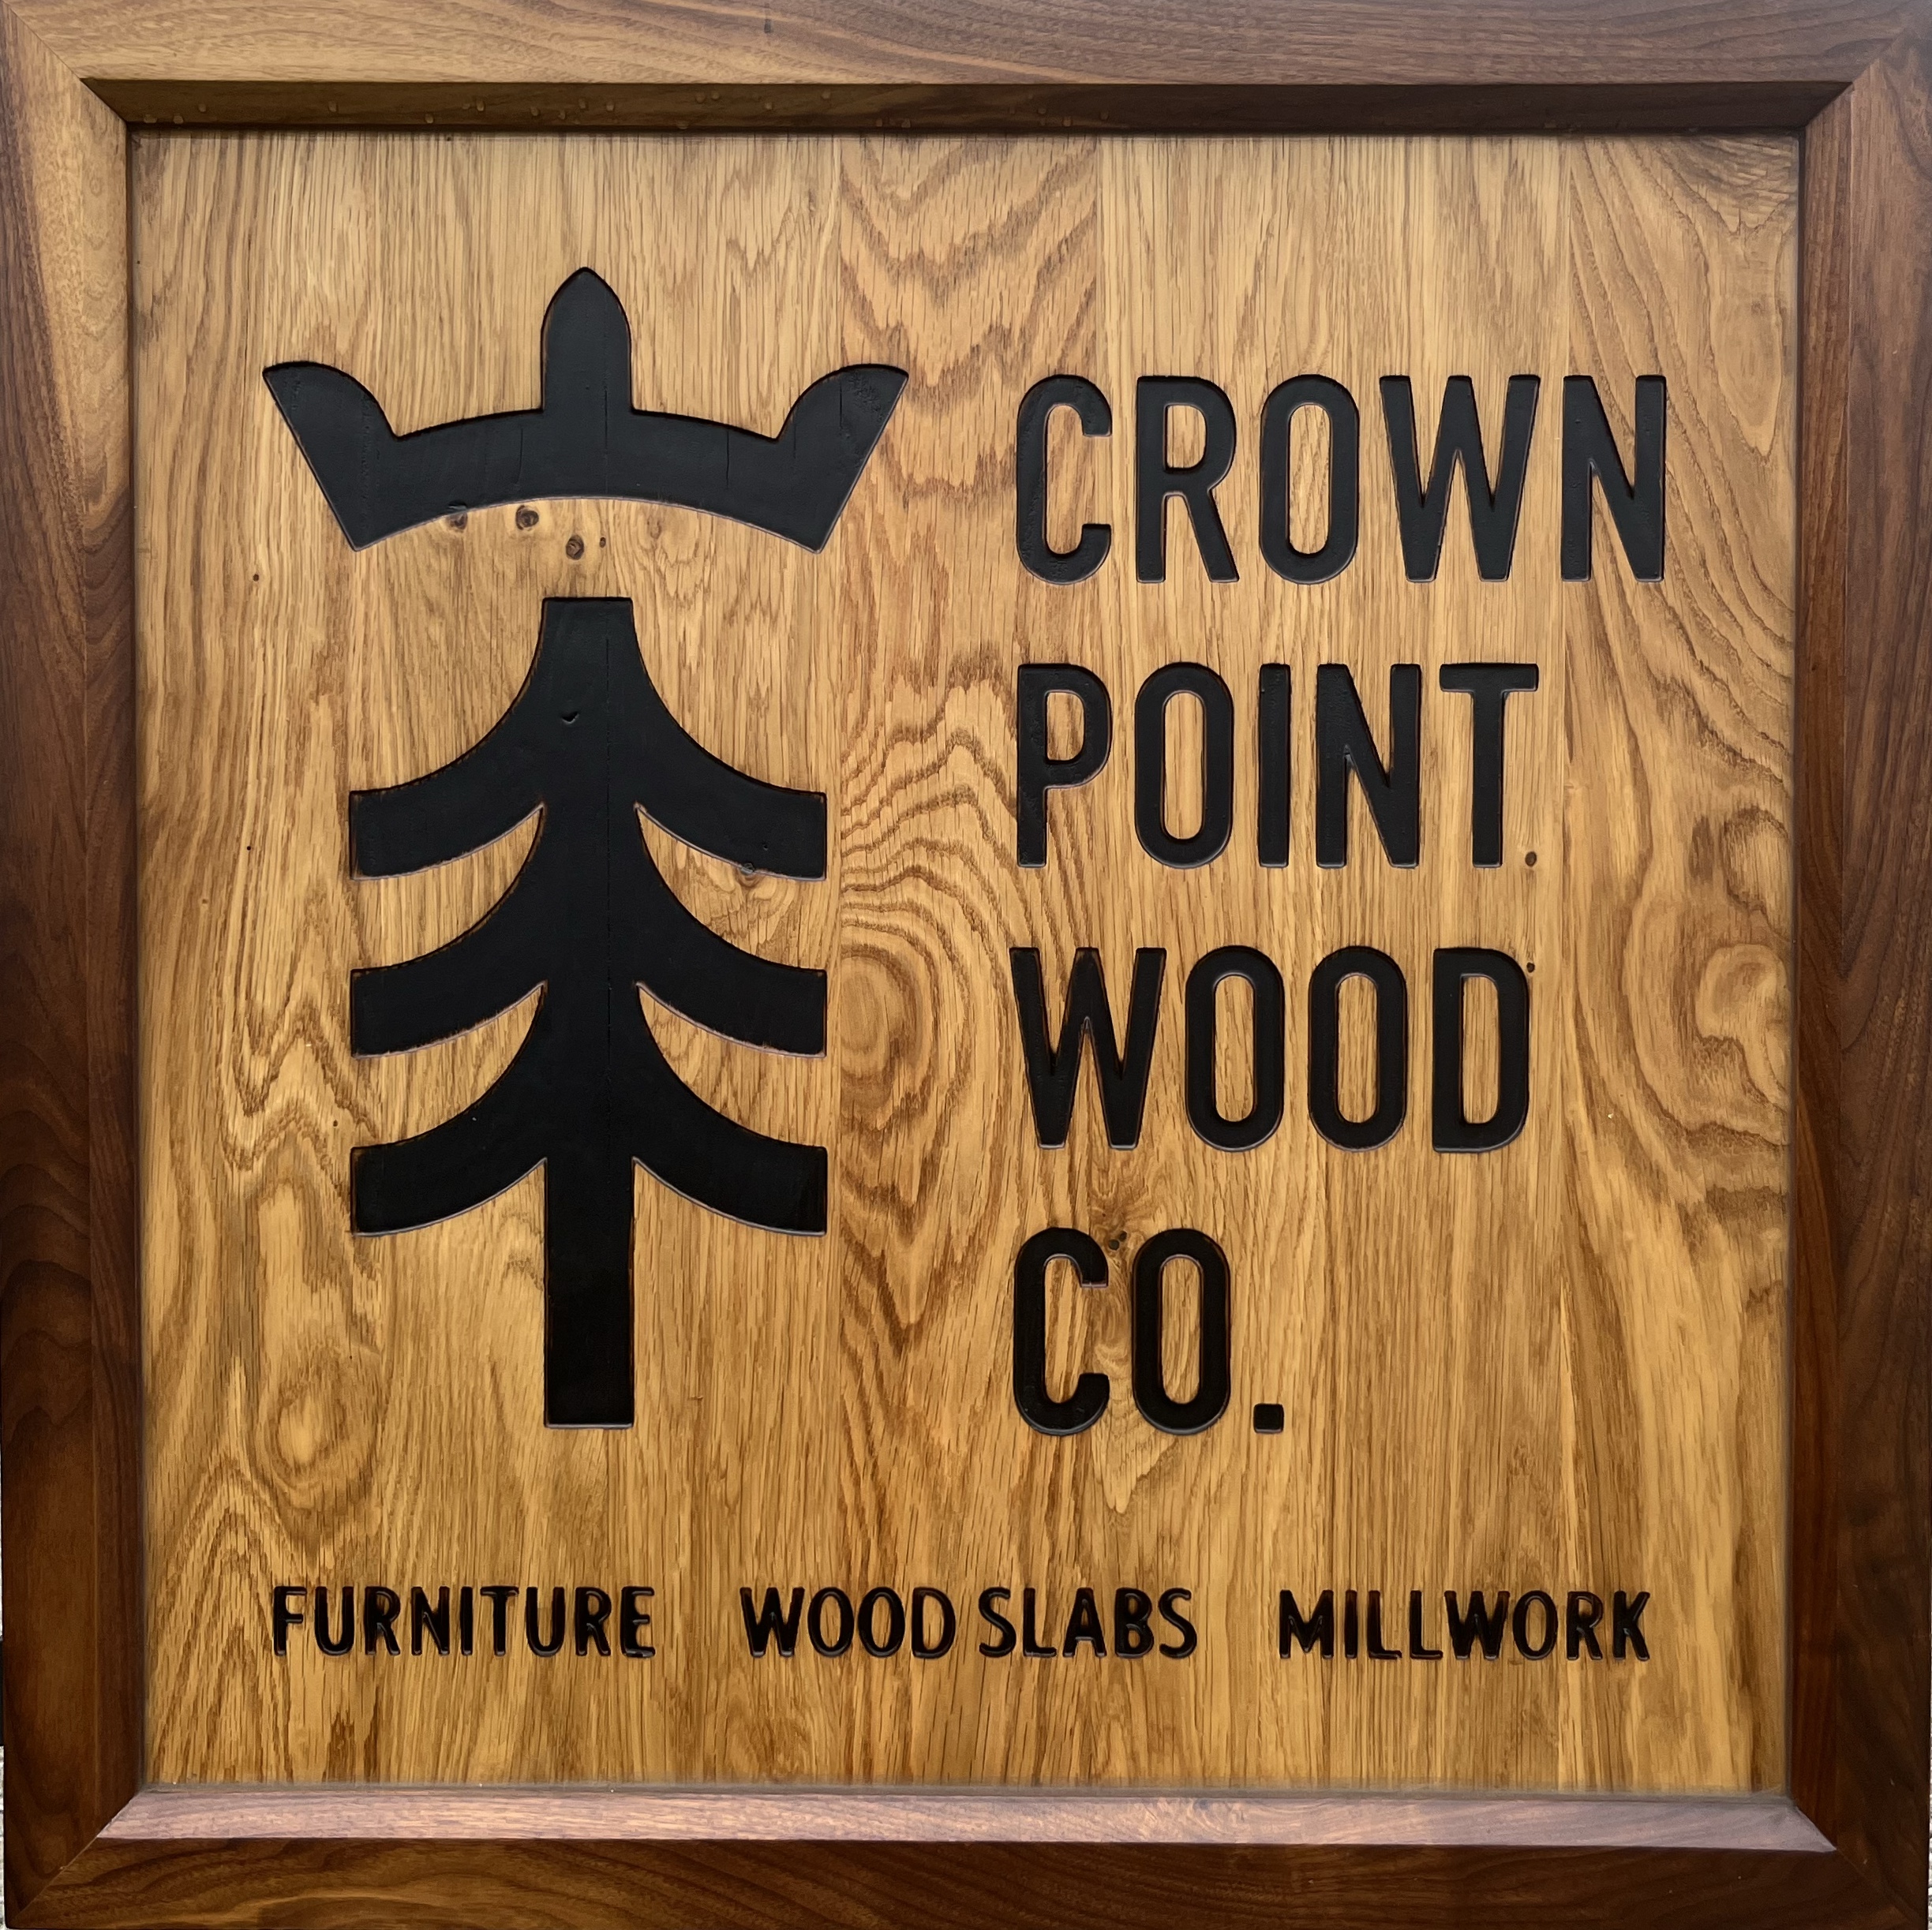 Crown Point Wood Co.'s logo